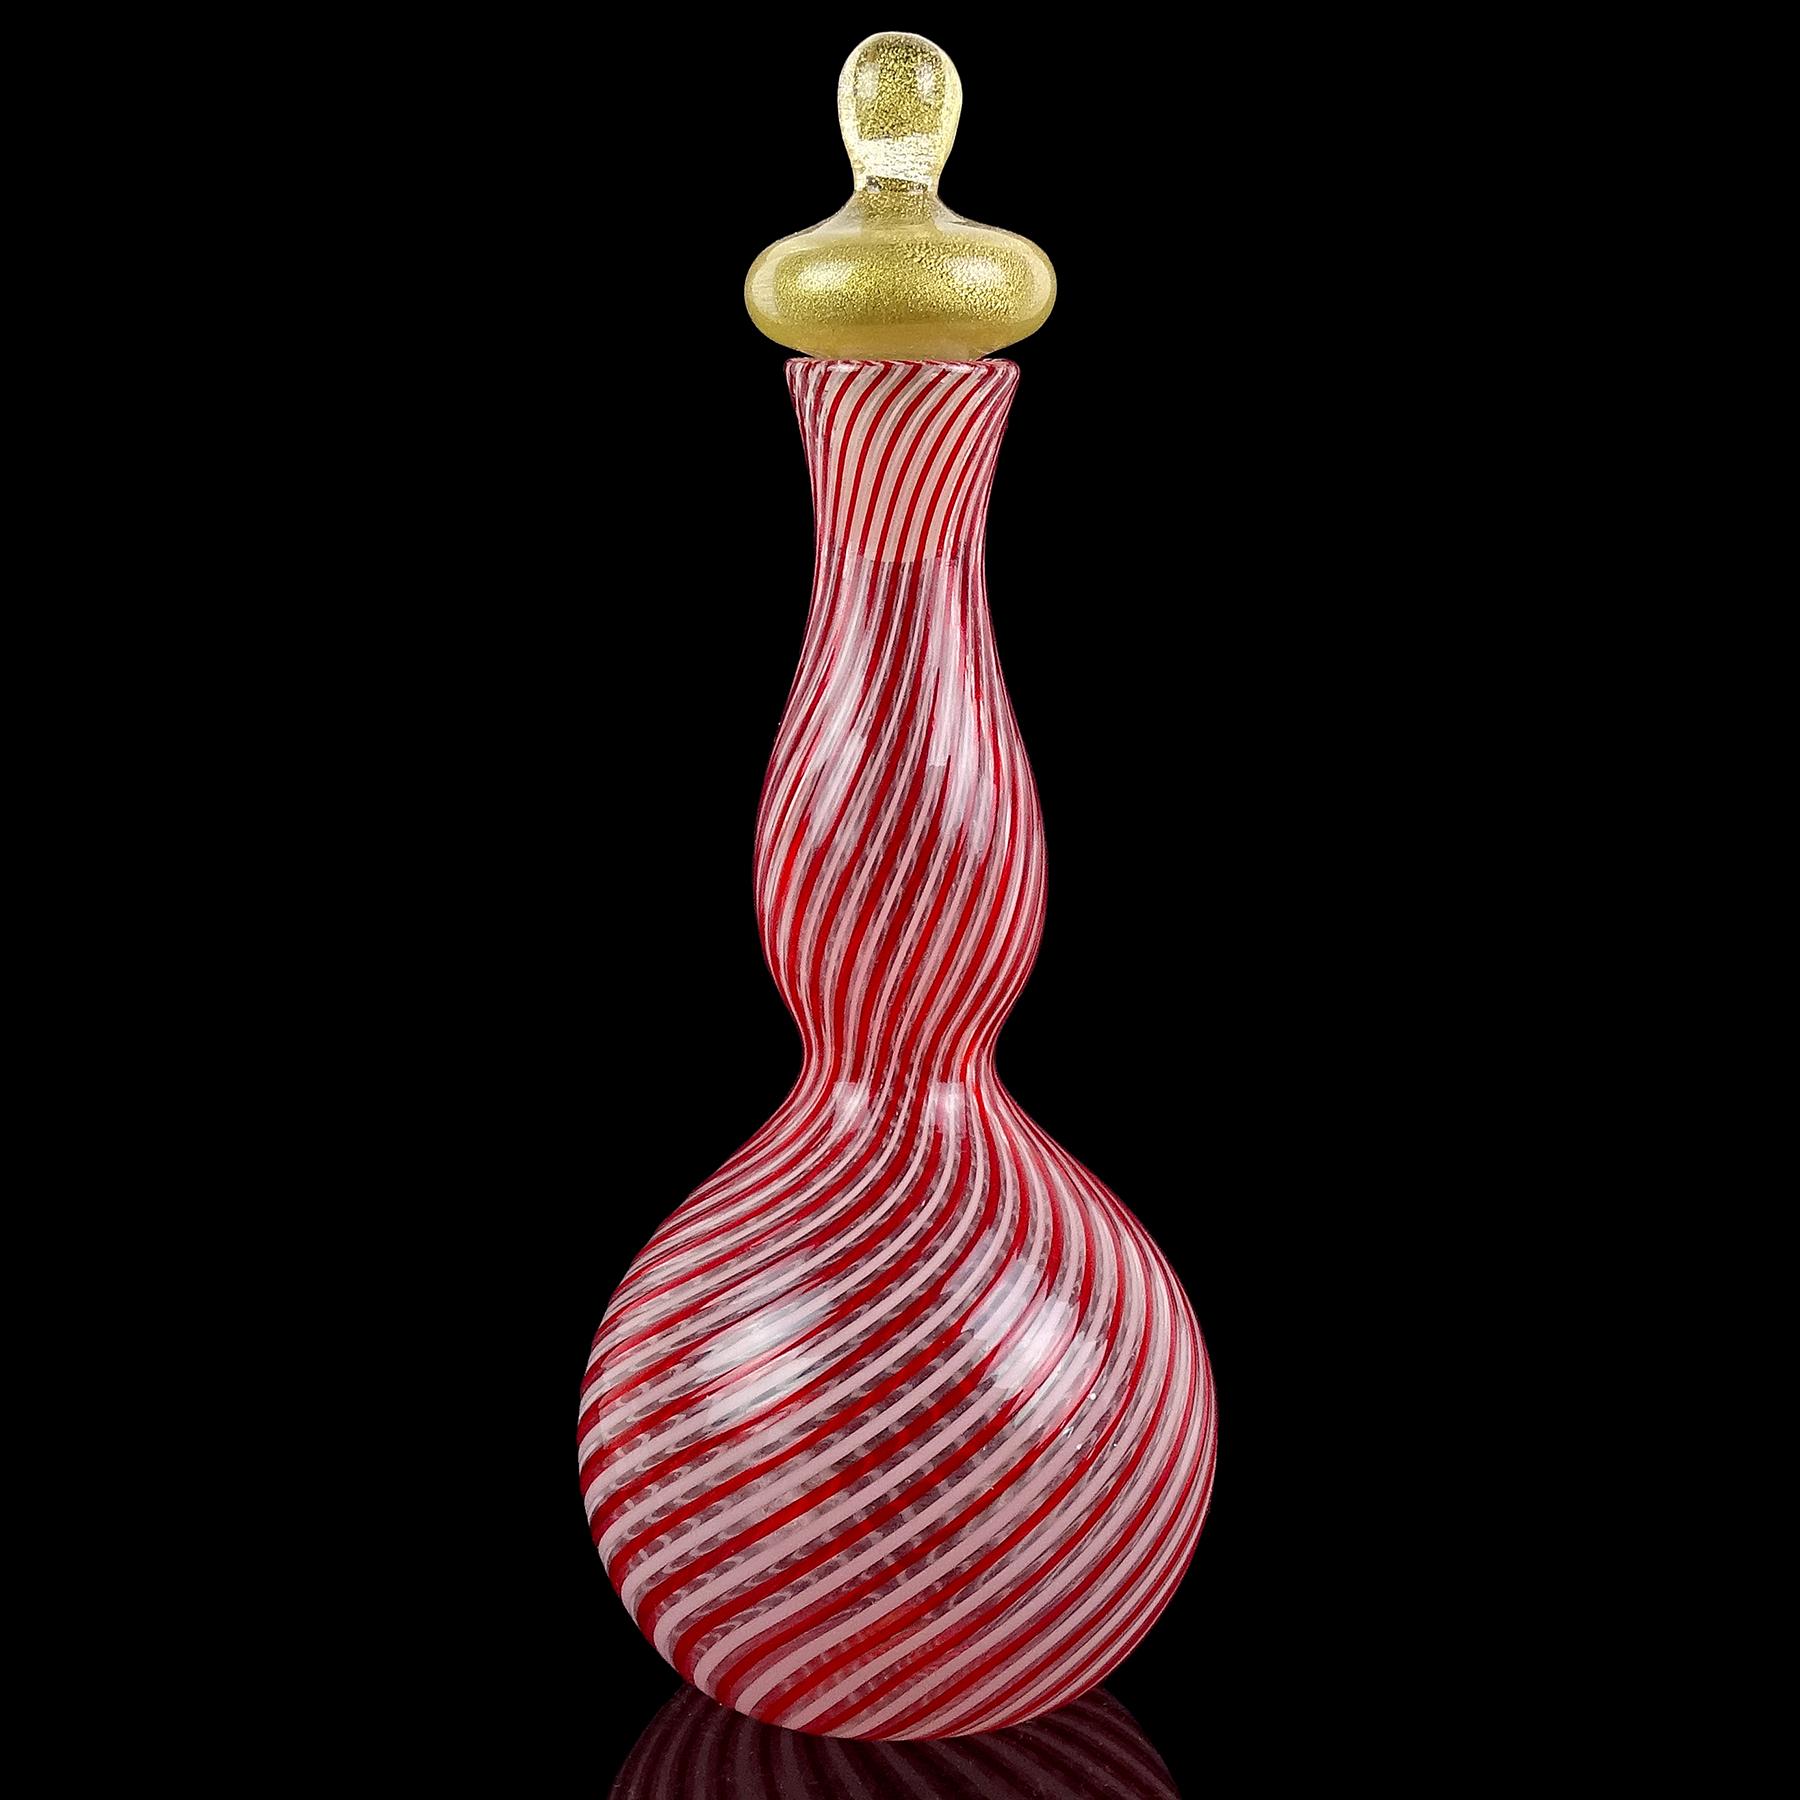 Beautiful vintage Murano hand blown red and white ribbons, with gold flecks Italian art glass Genie bottle decanter. Documented to designer Dino Martens for Aureliano Toso. Similar piece is shown on the Dino Martens book, model number 6293. The